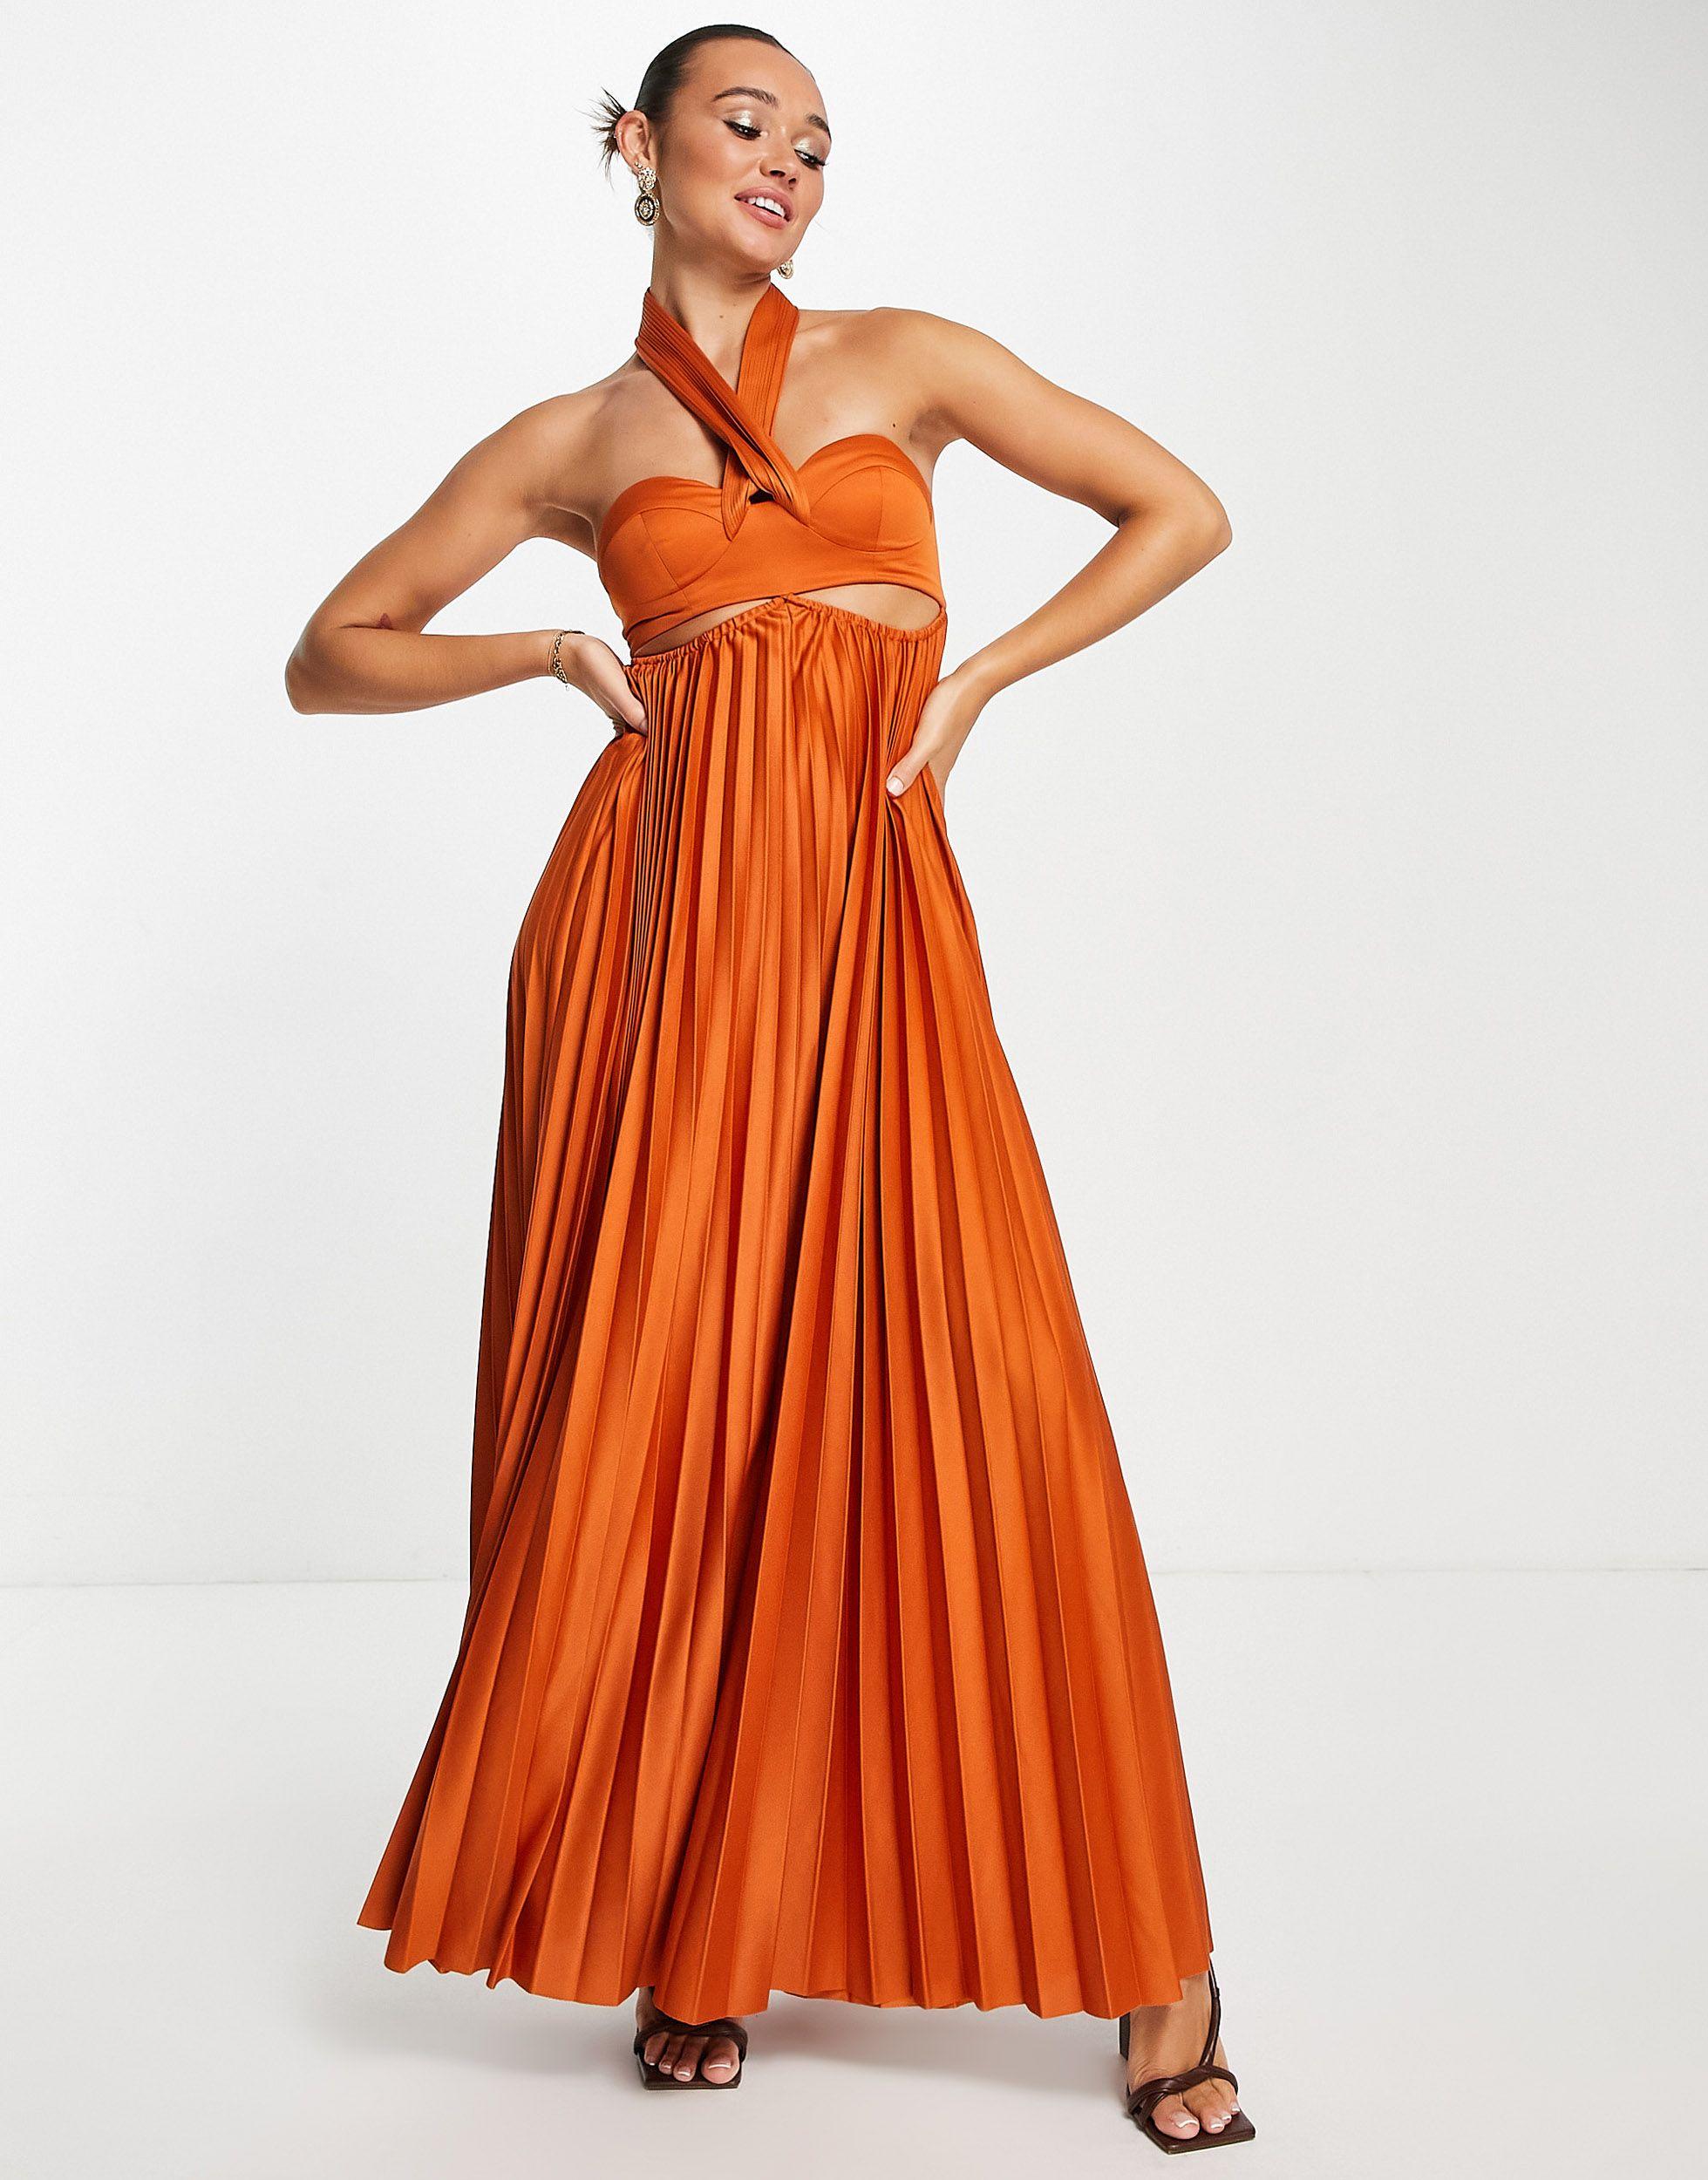 ASOS Halter Pleated Cut Out Maxi Dress in Orange | Lyst Canada